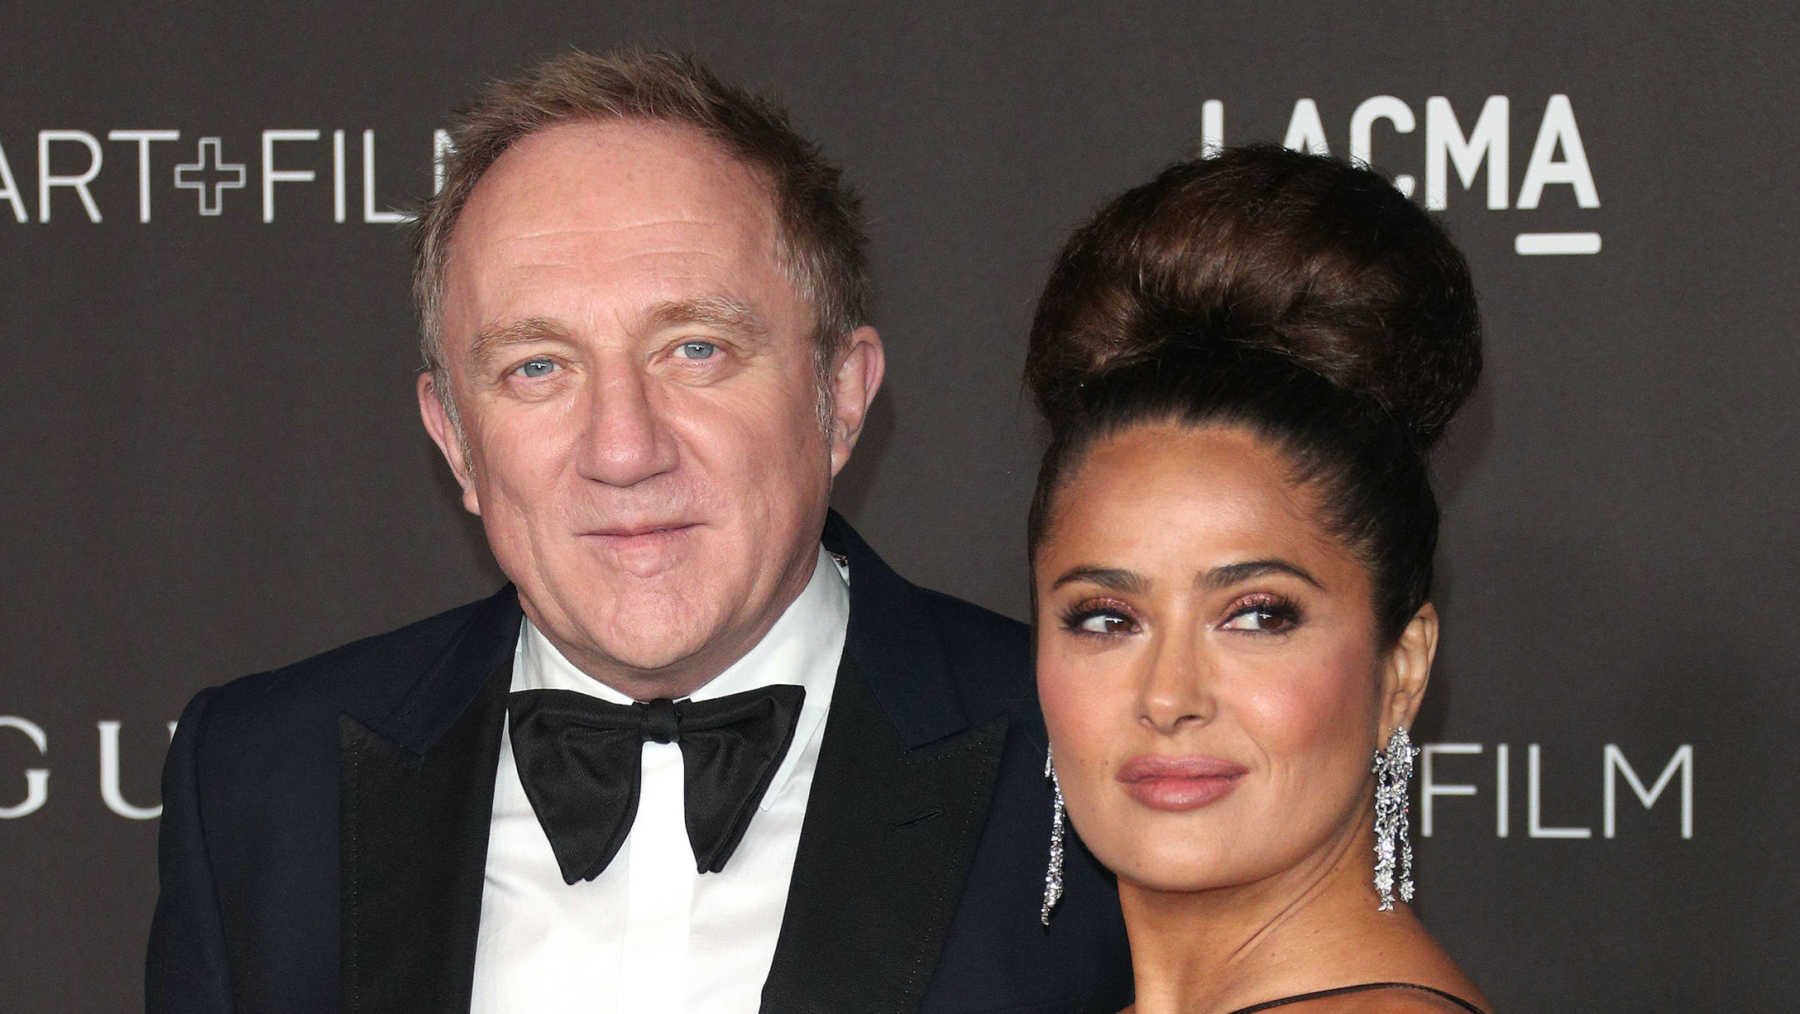 Salma Hayek Recalls How She Wrongly Suspected Her Husband of Cheating